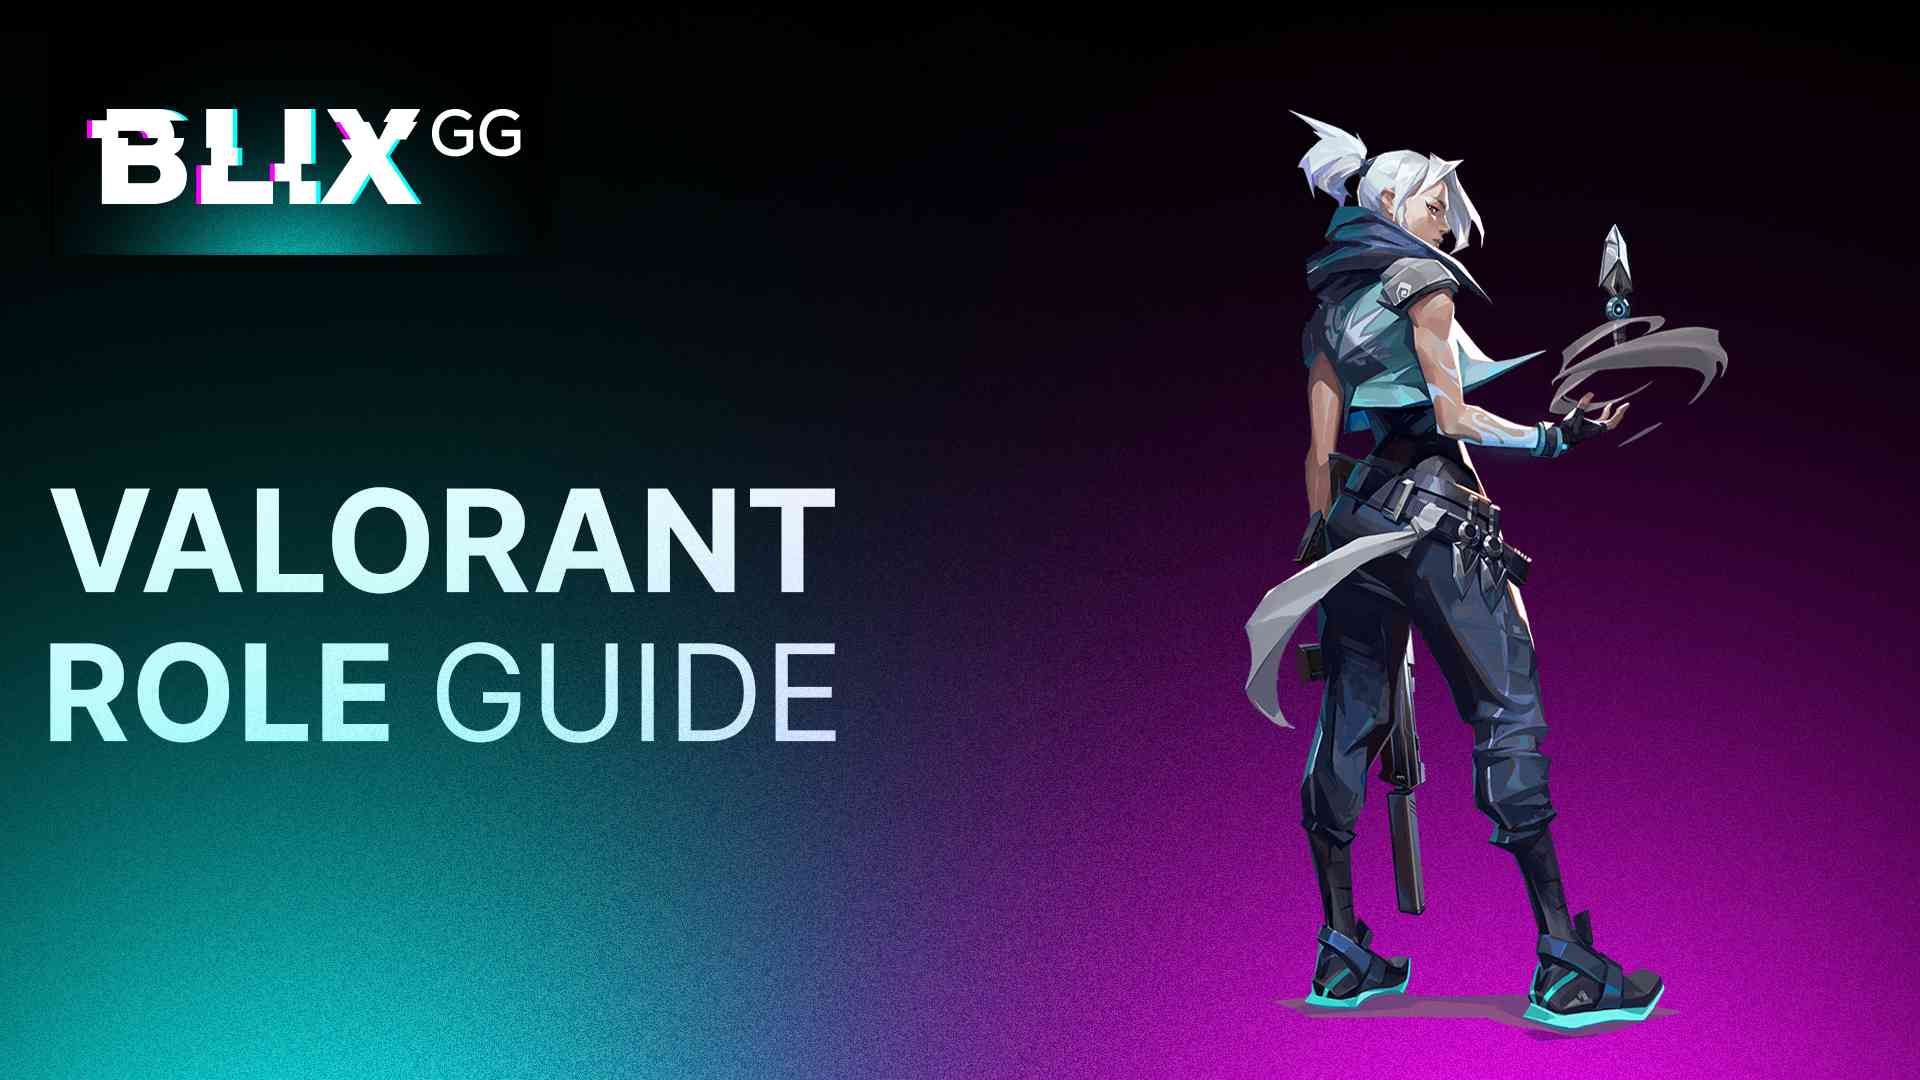 Omen Guide: Abilities & Skills of Valorant's new agent